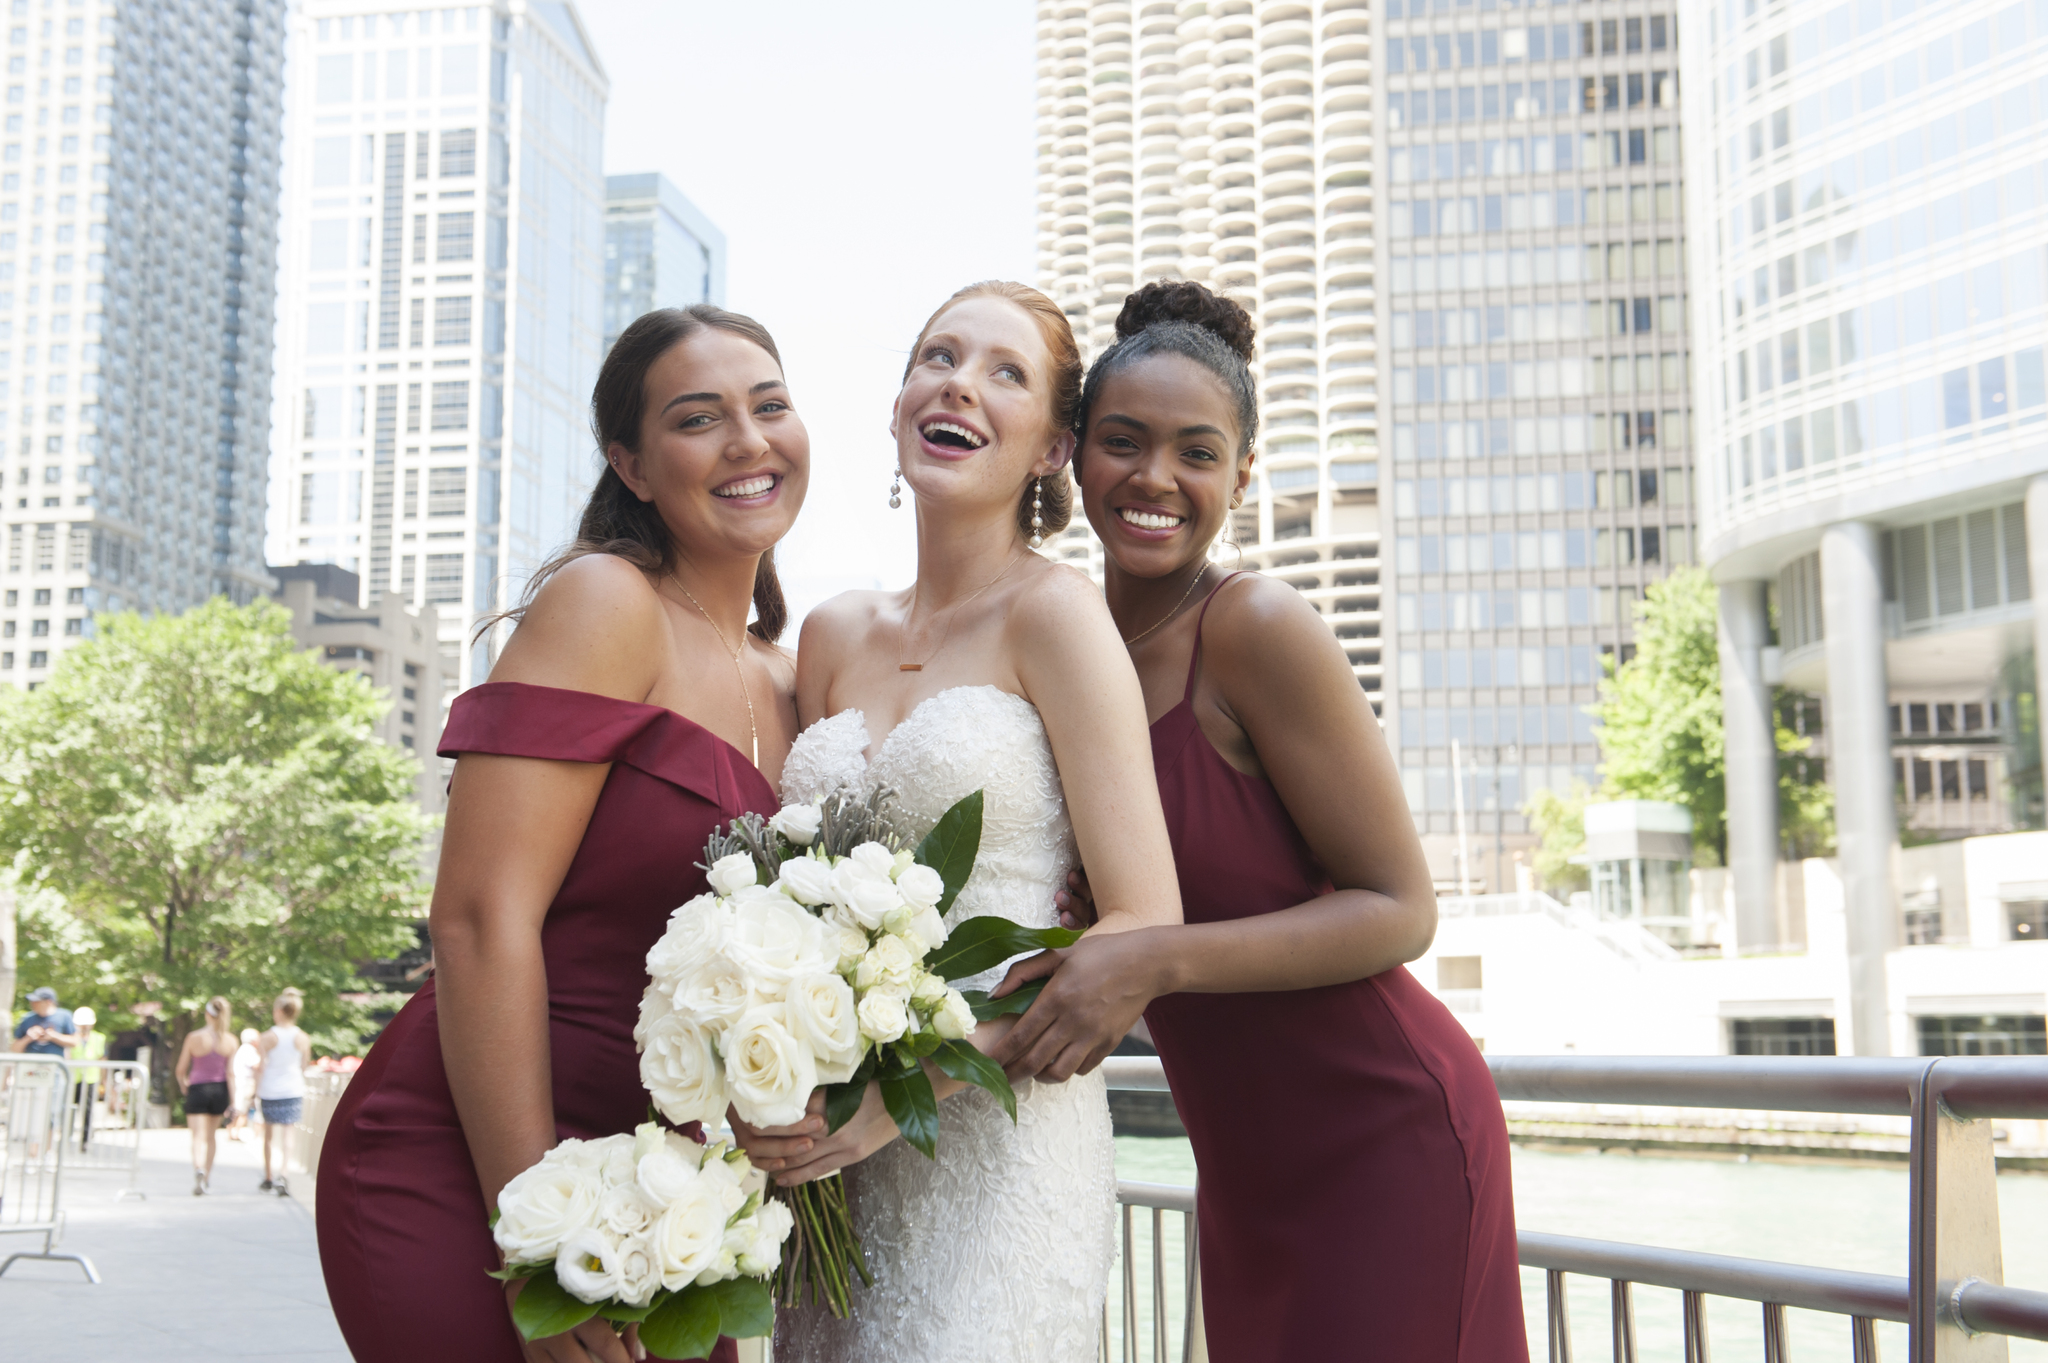 A bride is surrounded by a bridesmaid on each side as they laugh.